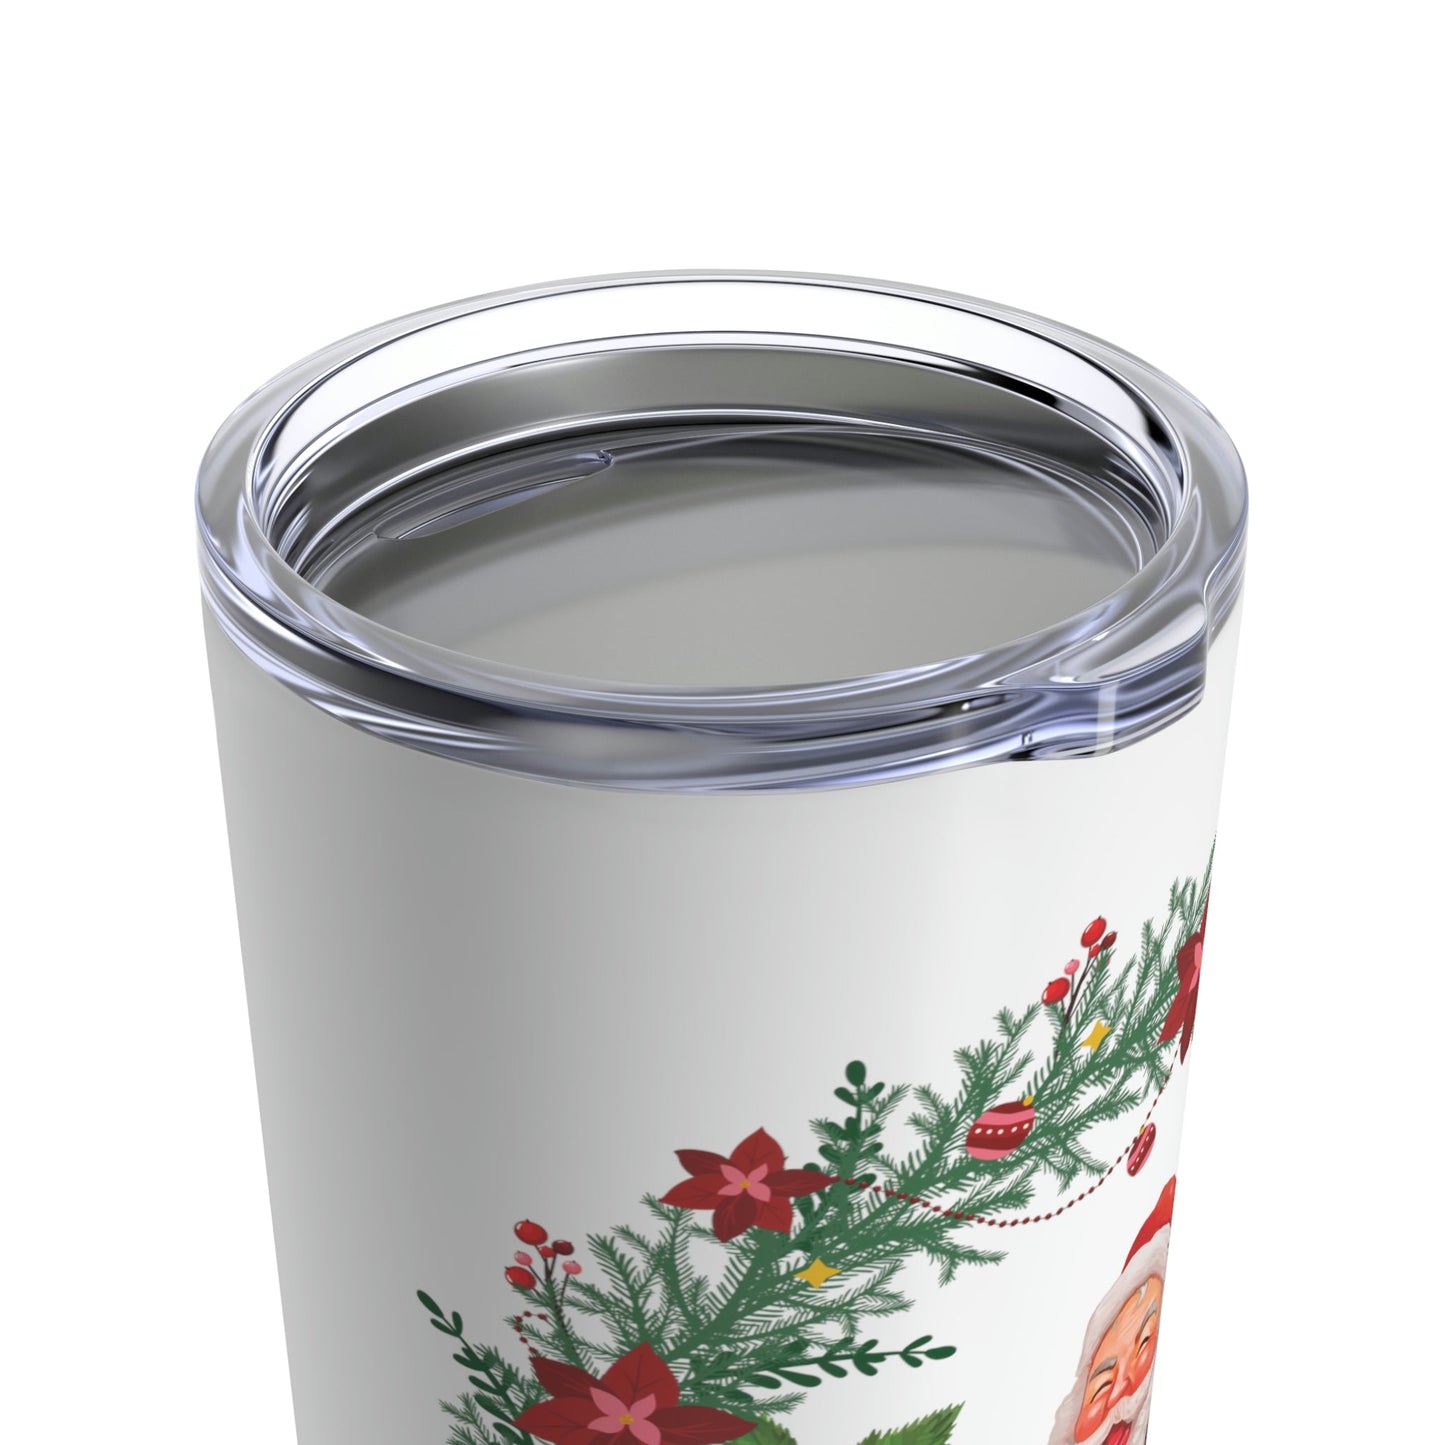 Christmas Wreath Santa Claus Traditional Stainless Steel Hot or Cold Vacuum Tumbler 20oz Ichaku [Perfect Gifts Selection]